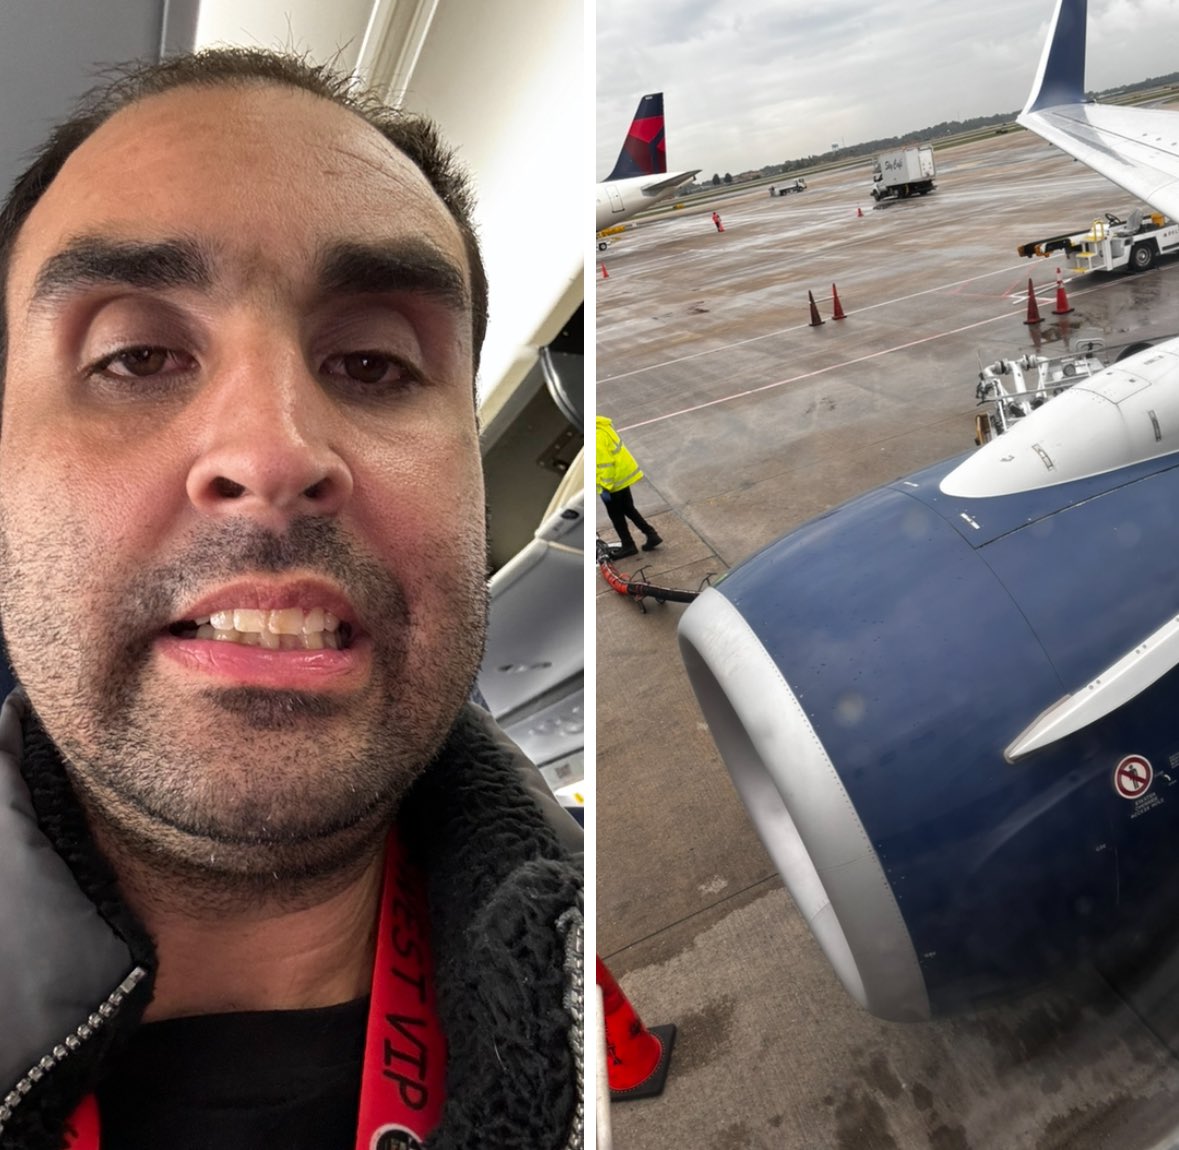 Check out DJ Alex Reyes #djalexreyes on board @Delta #deltaairlines flight# 1072 from #Atlanta to #SanFrancisco 

Our vacation is over you can see we’re currently seated in row 14 D in #maincabin #iflydelta #dl1072 #homesweethome